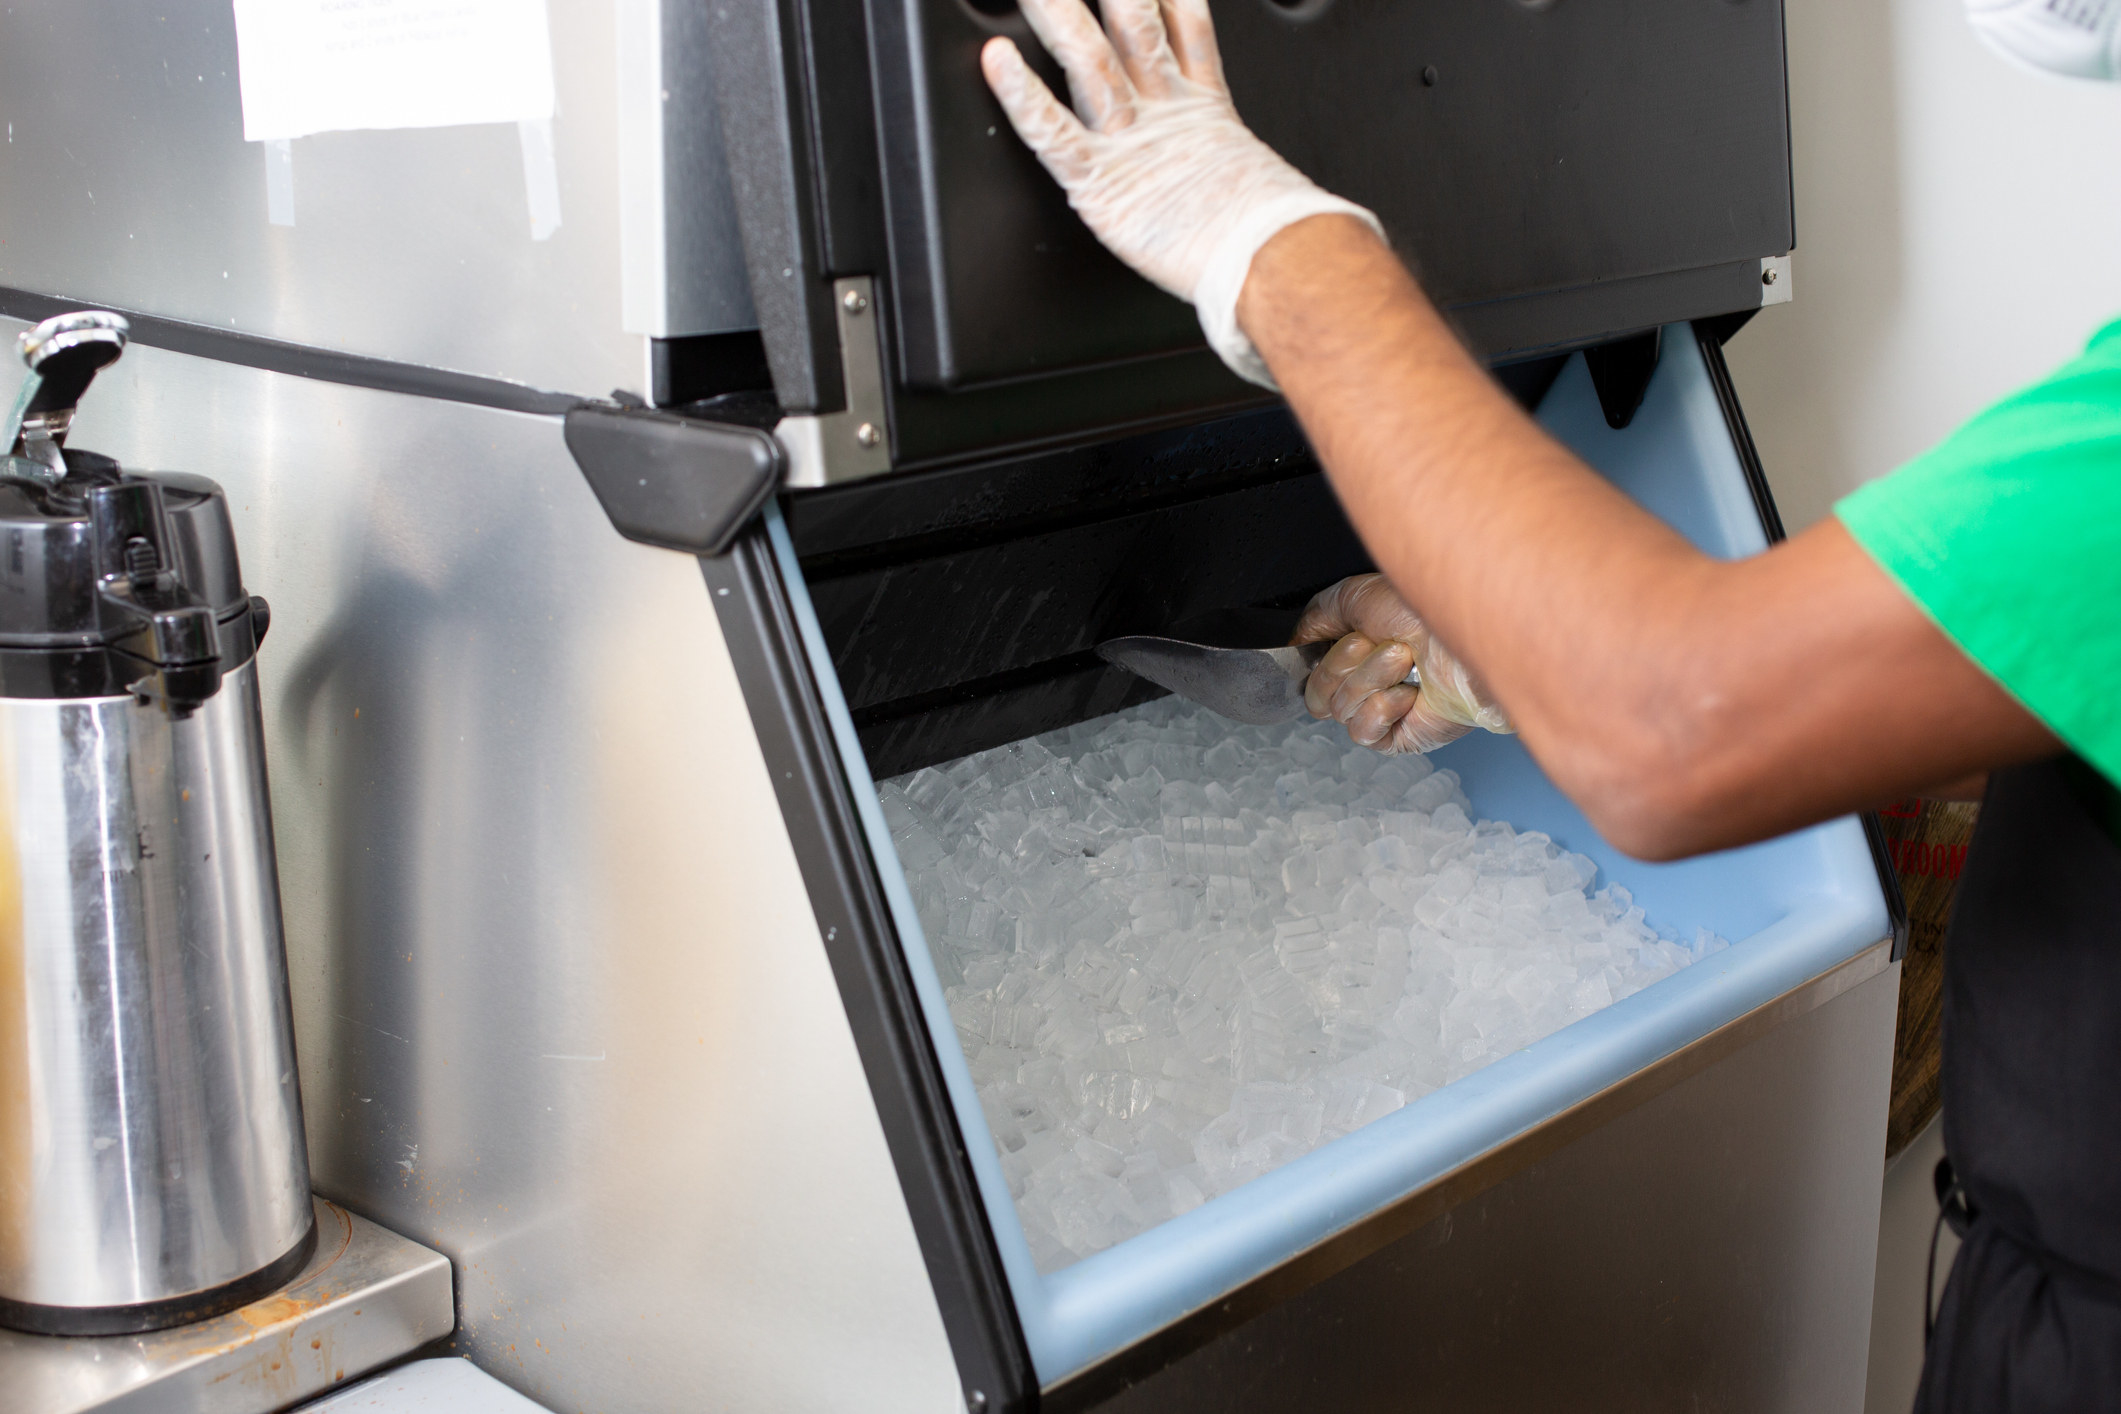 A person scooping ice.